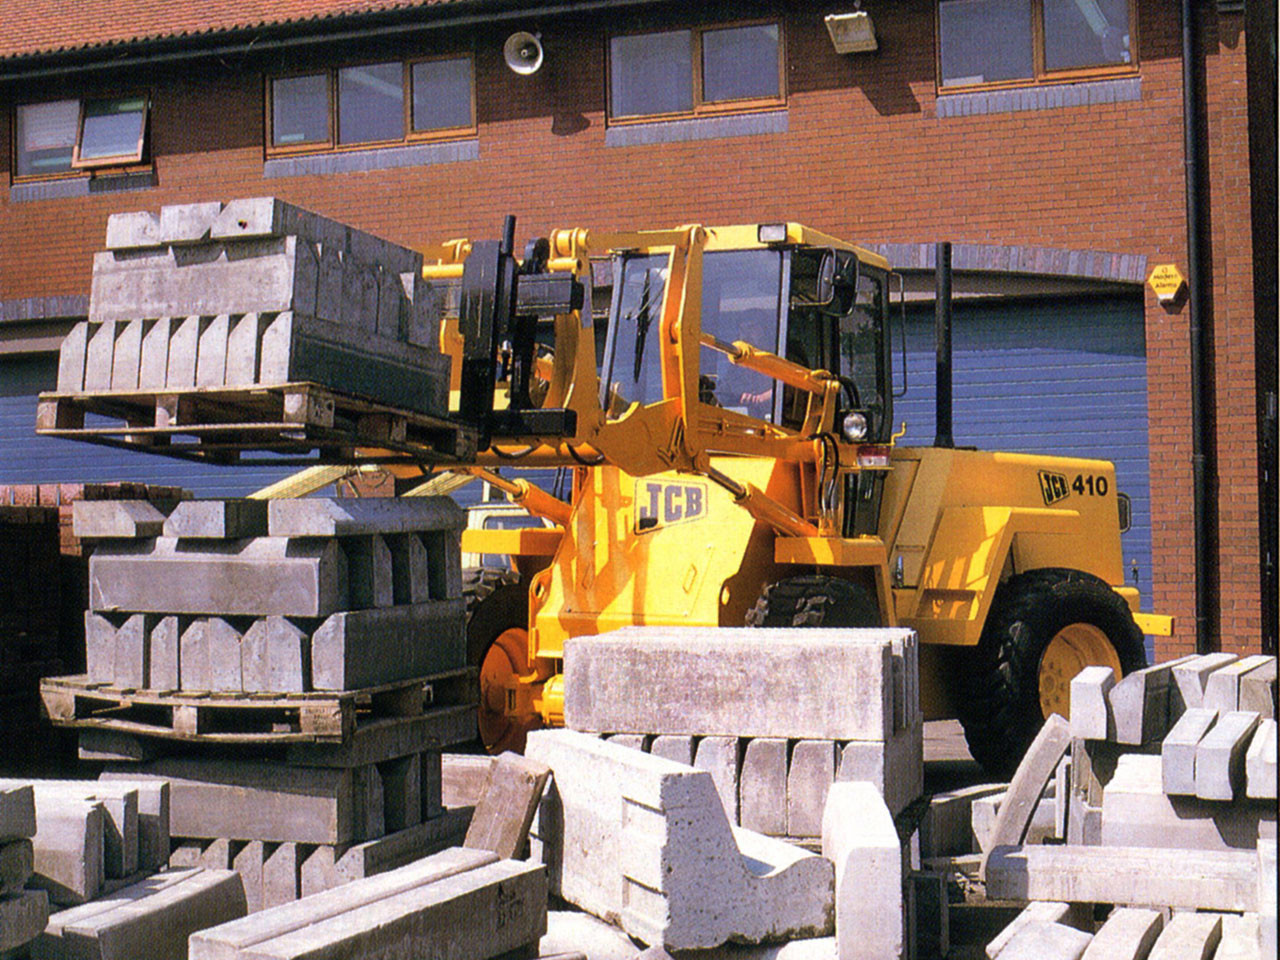 JCB nelle pagine della storia 1680x1050_1558611213_1981---the-410-wheeled-loader-is-launched-to-develop-a-market-for-smaller-customers-such-as-builders-merchants